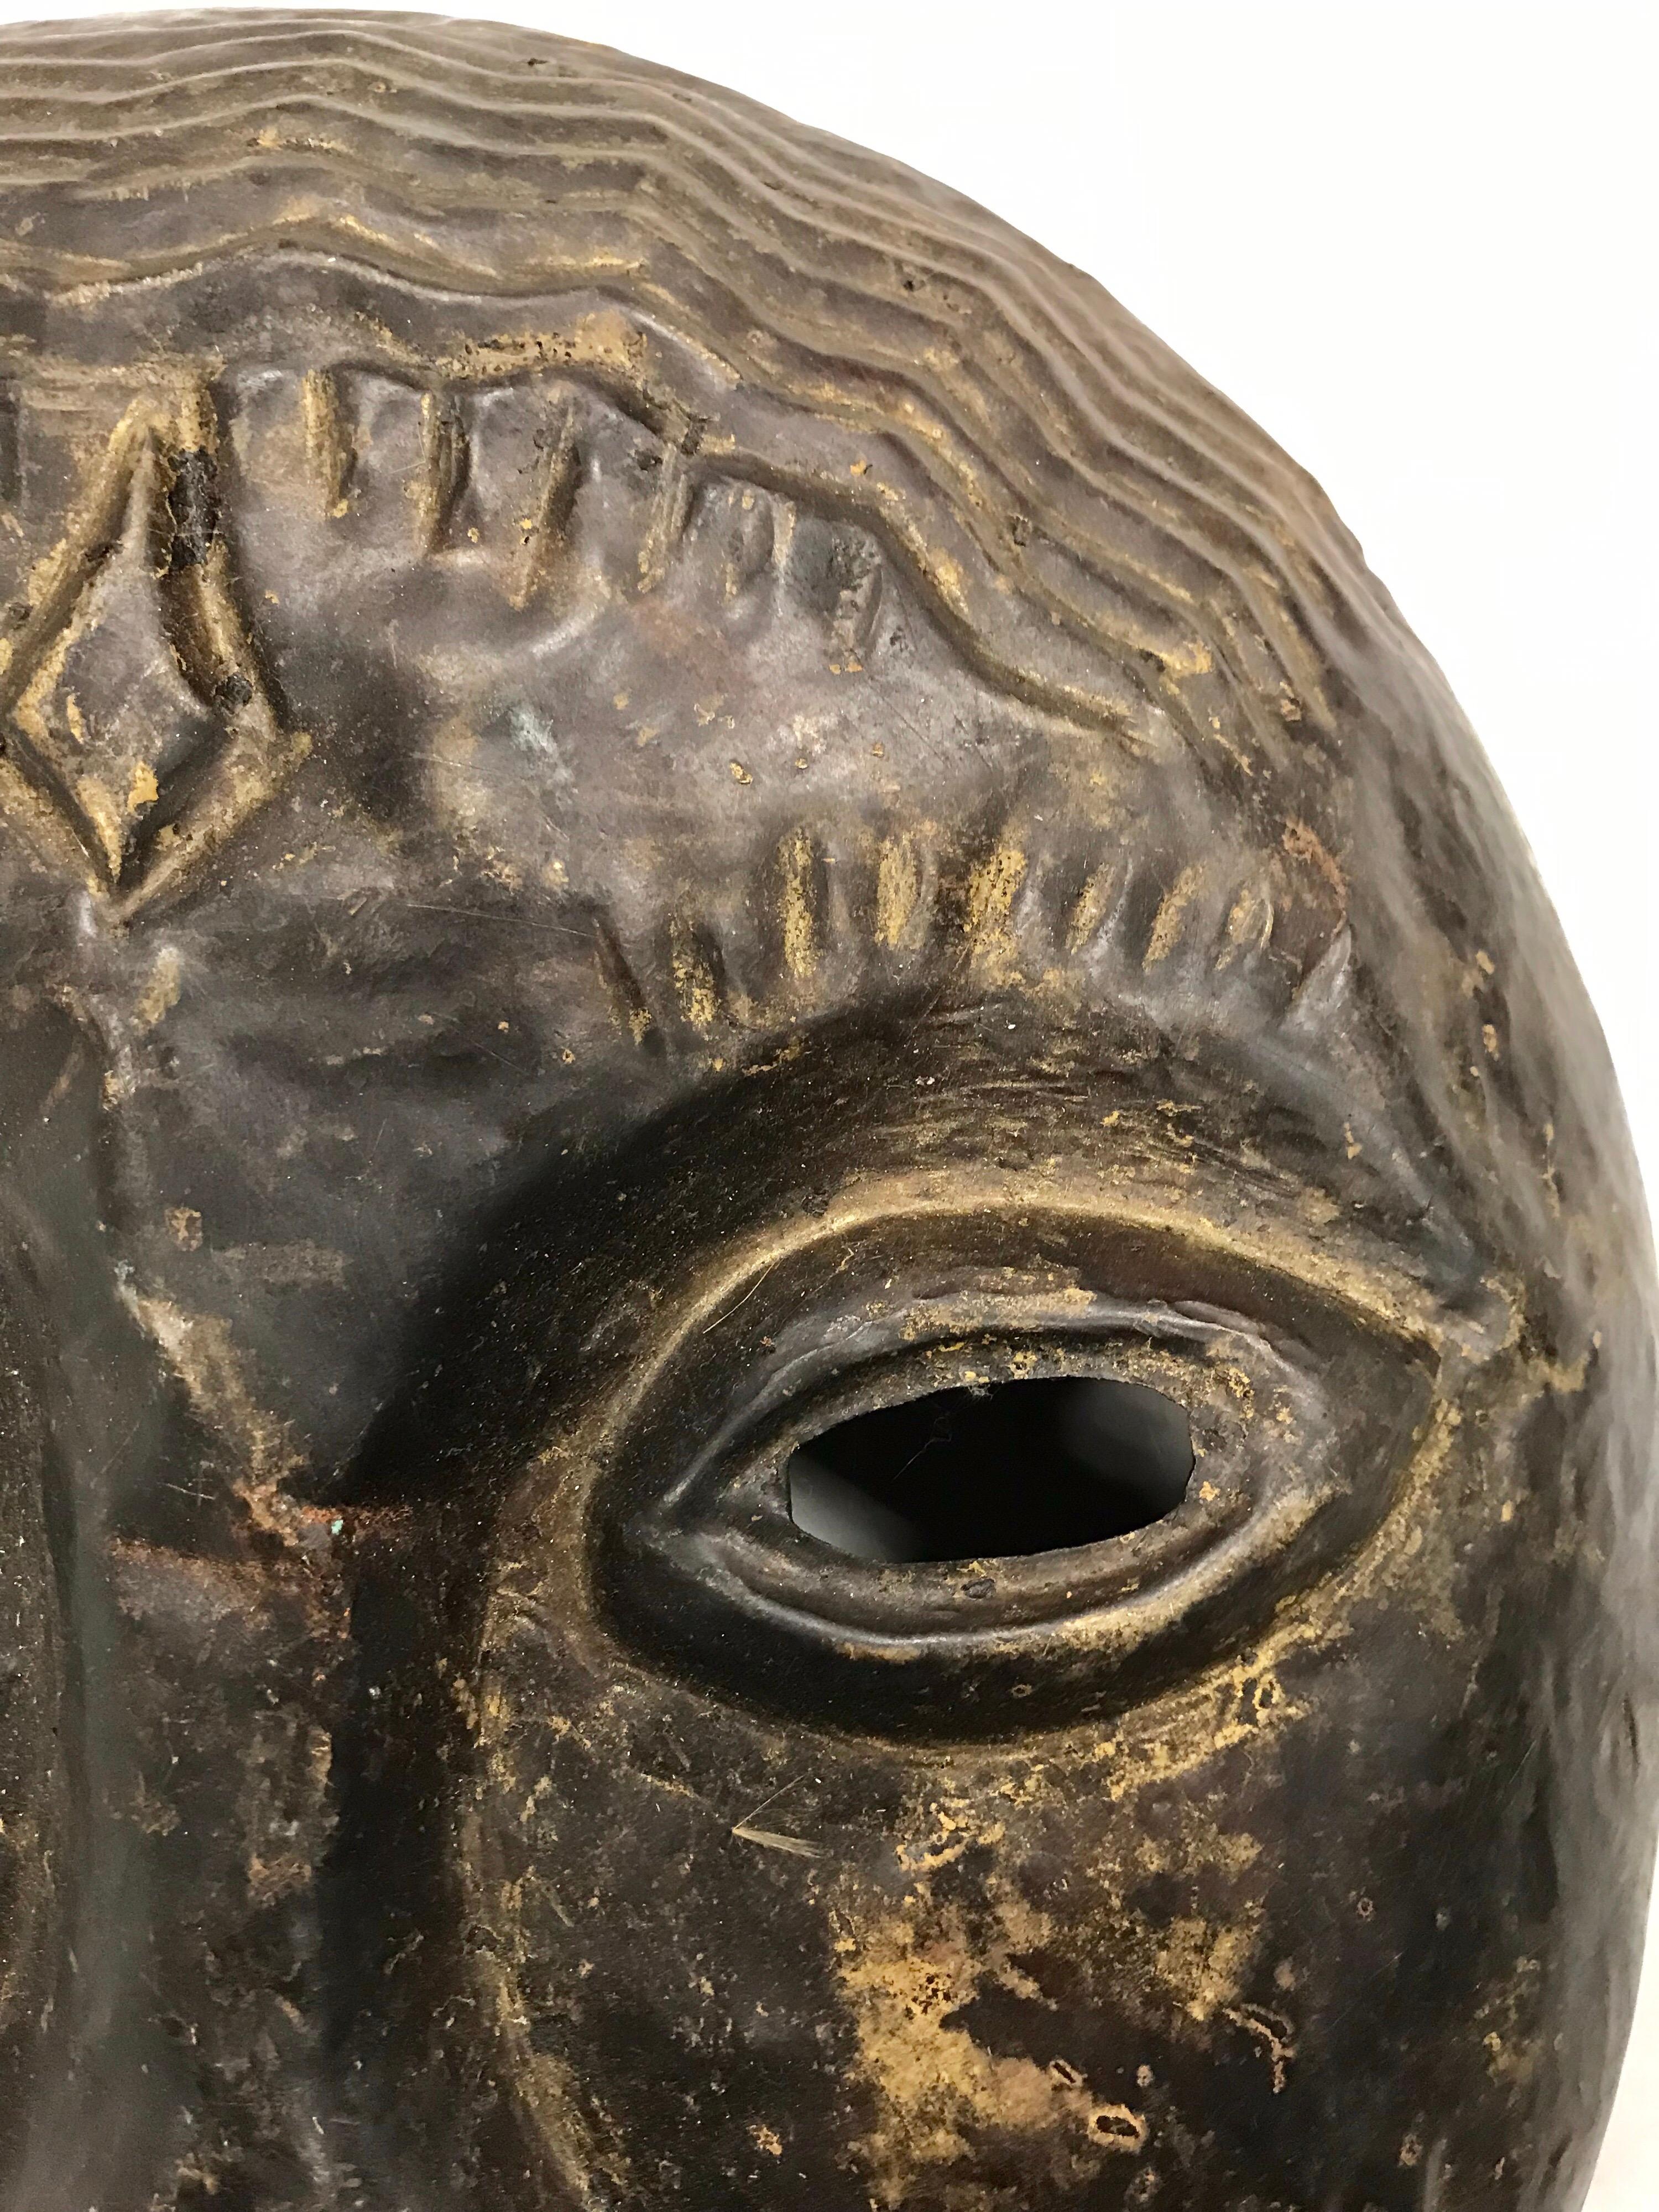 Vintage metal hanging mask sculpture acquired in the 1960s in Ghana, Africa.
It is made of metal and measures 13 inches across the face. It can be hung and has holes
in back to put a wire to do just that.